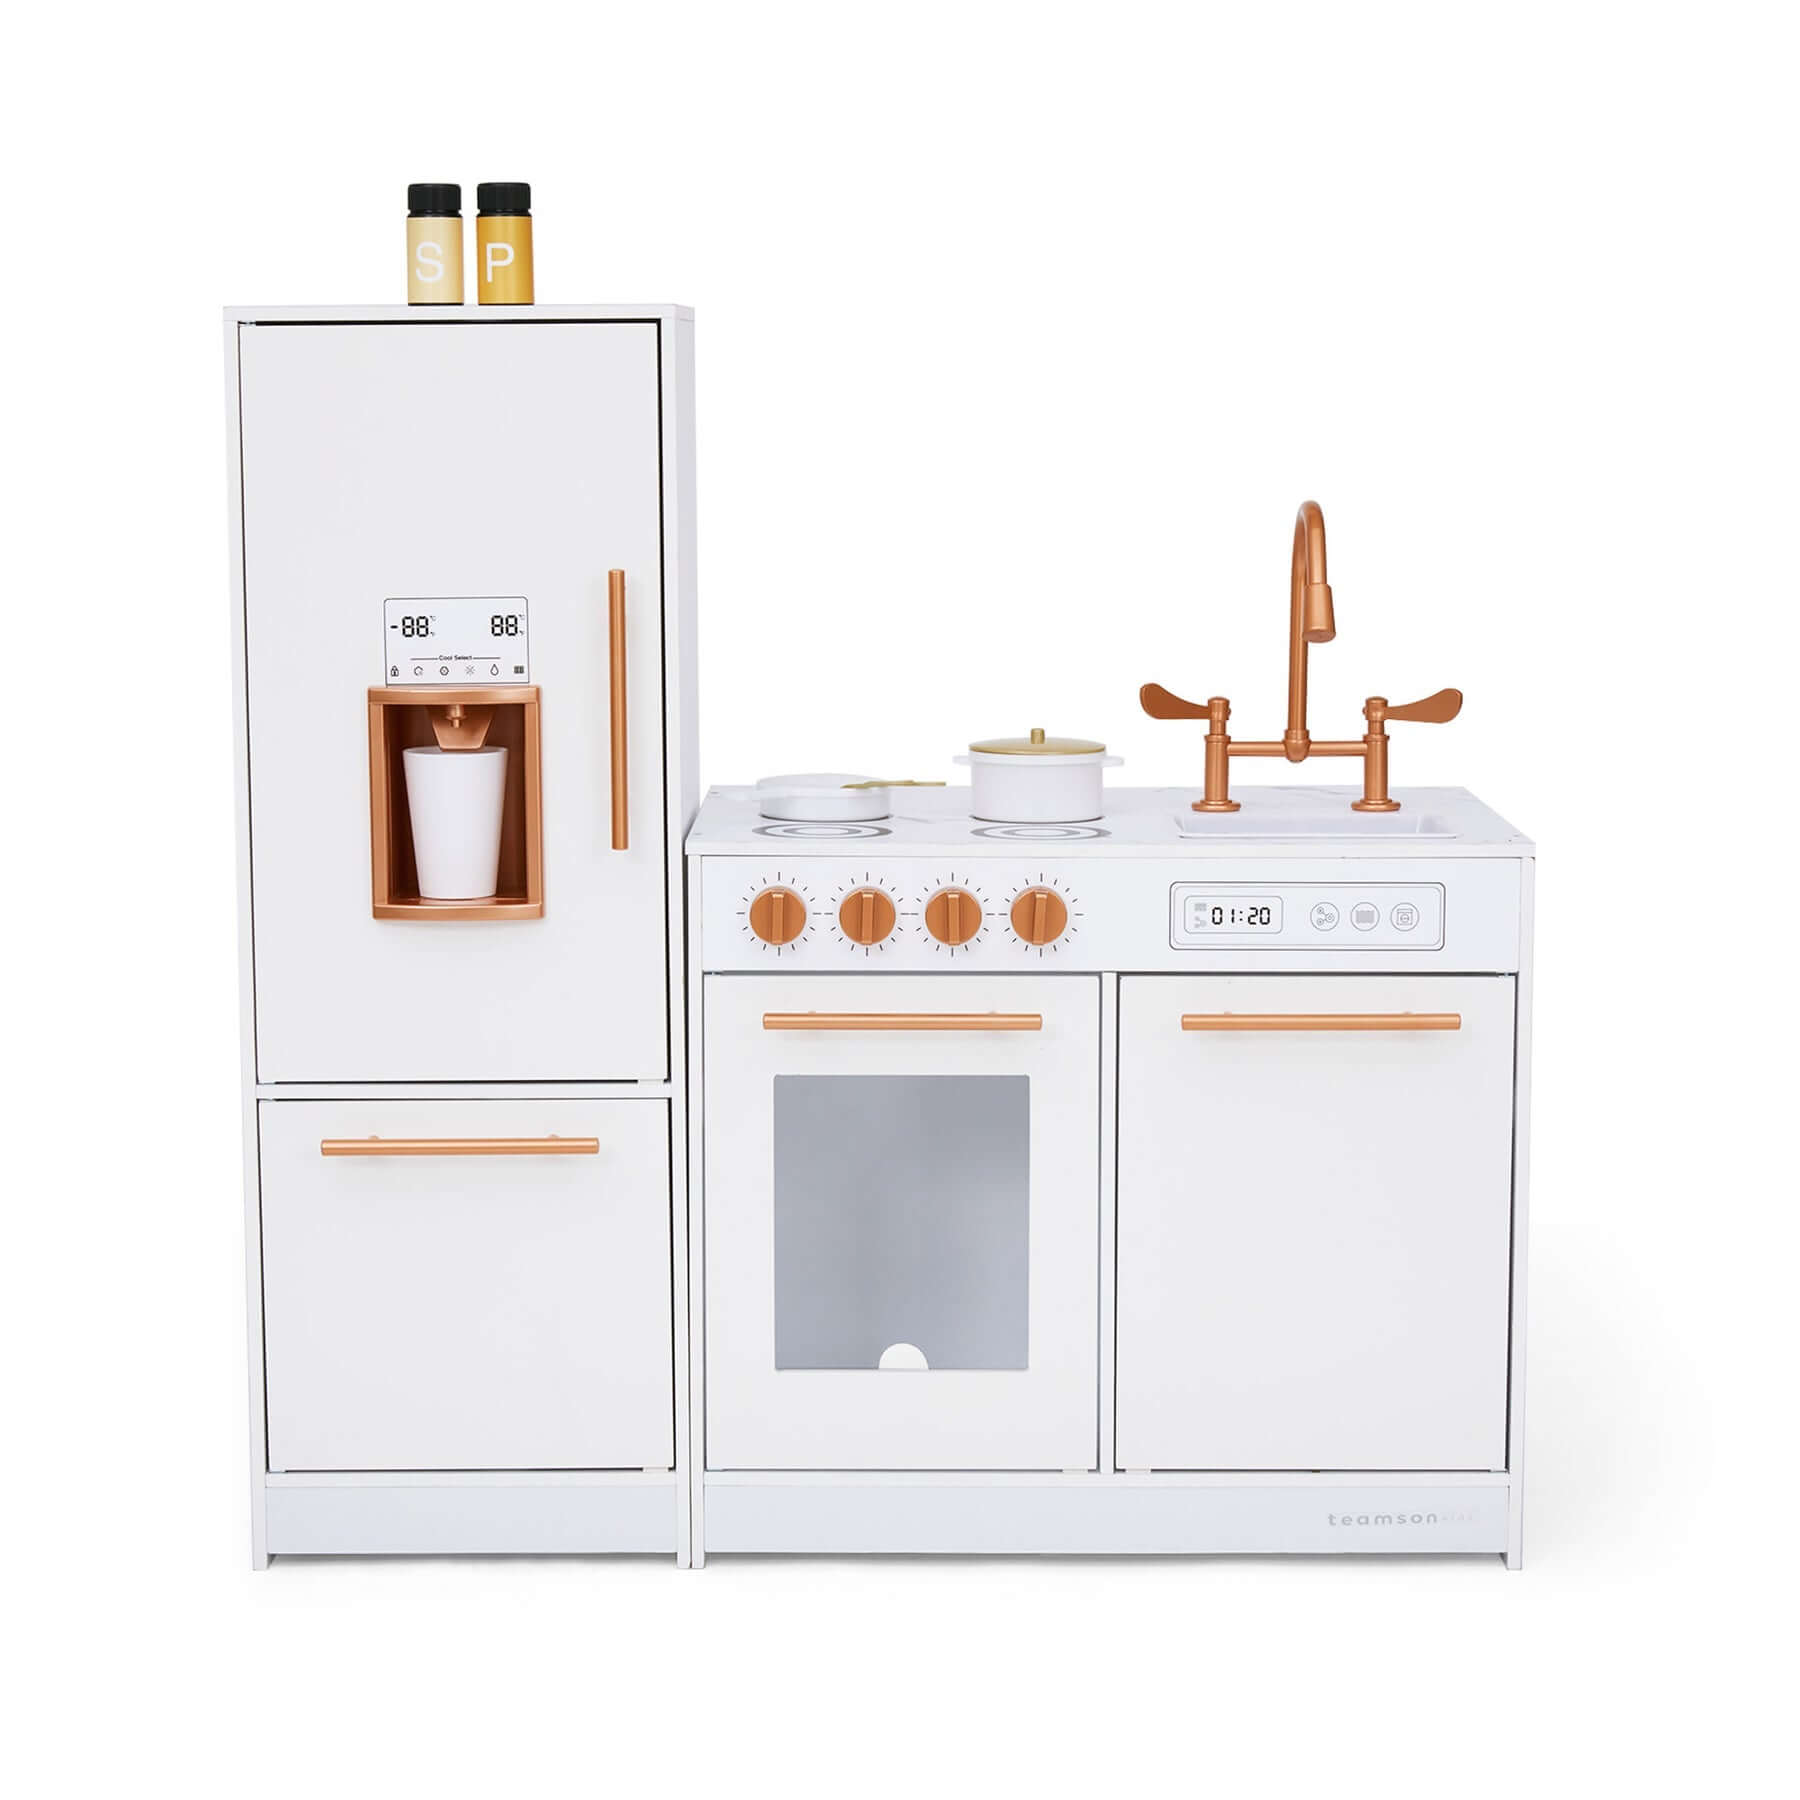 Teamson Kids Little Chef Milano Two-Piece Modular Modern Delight Play Kitchen TD-13811A front view white background